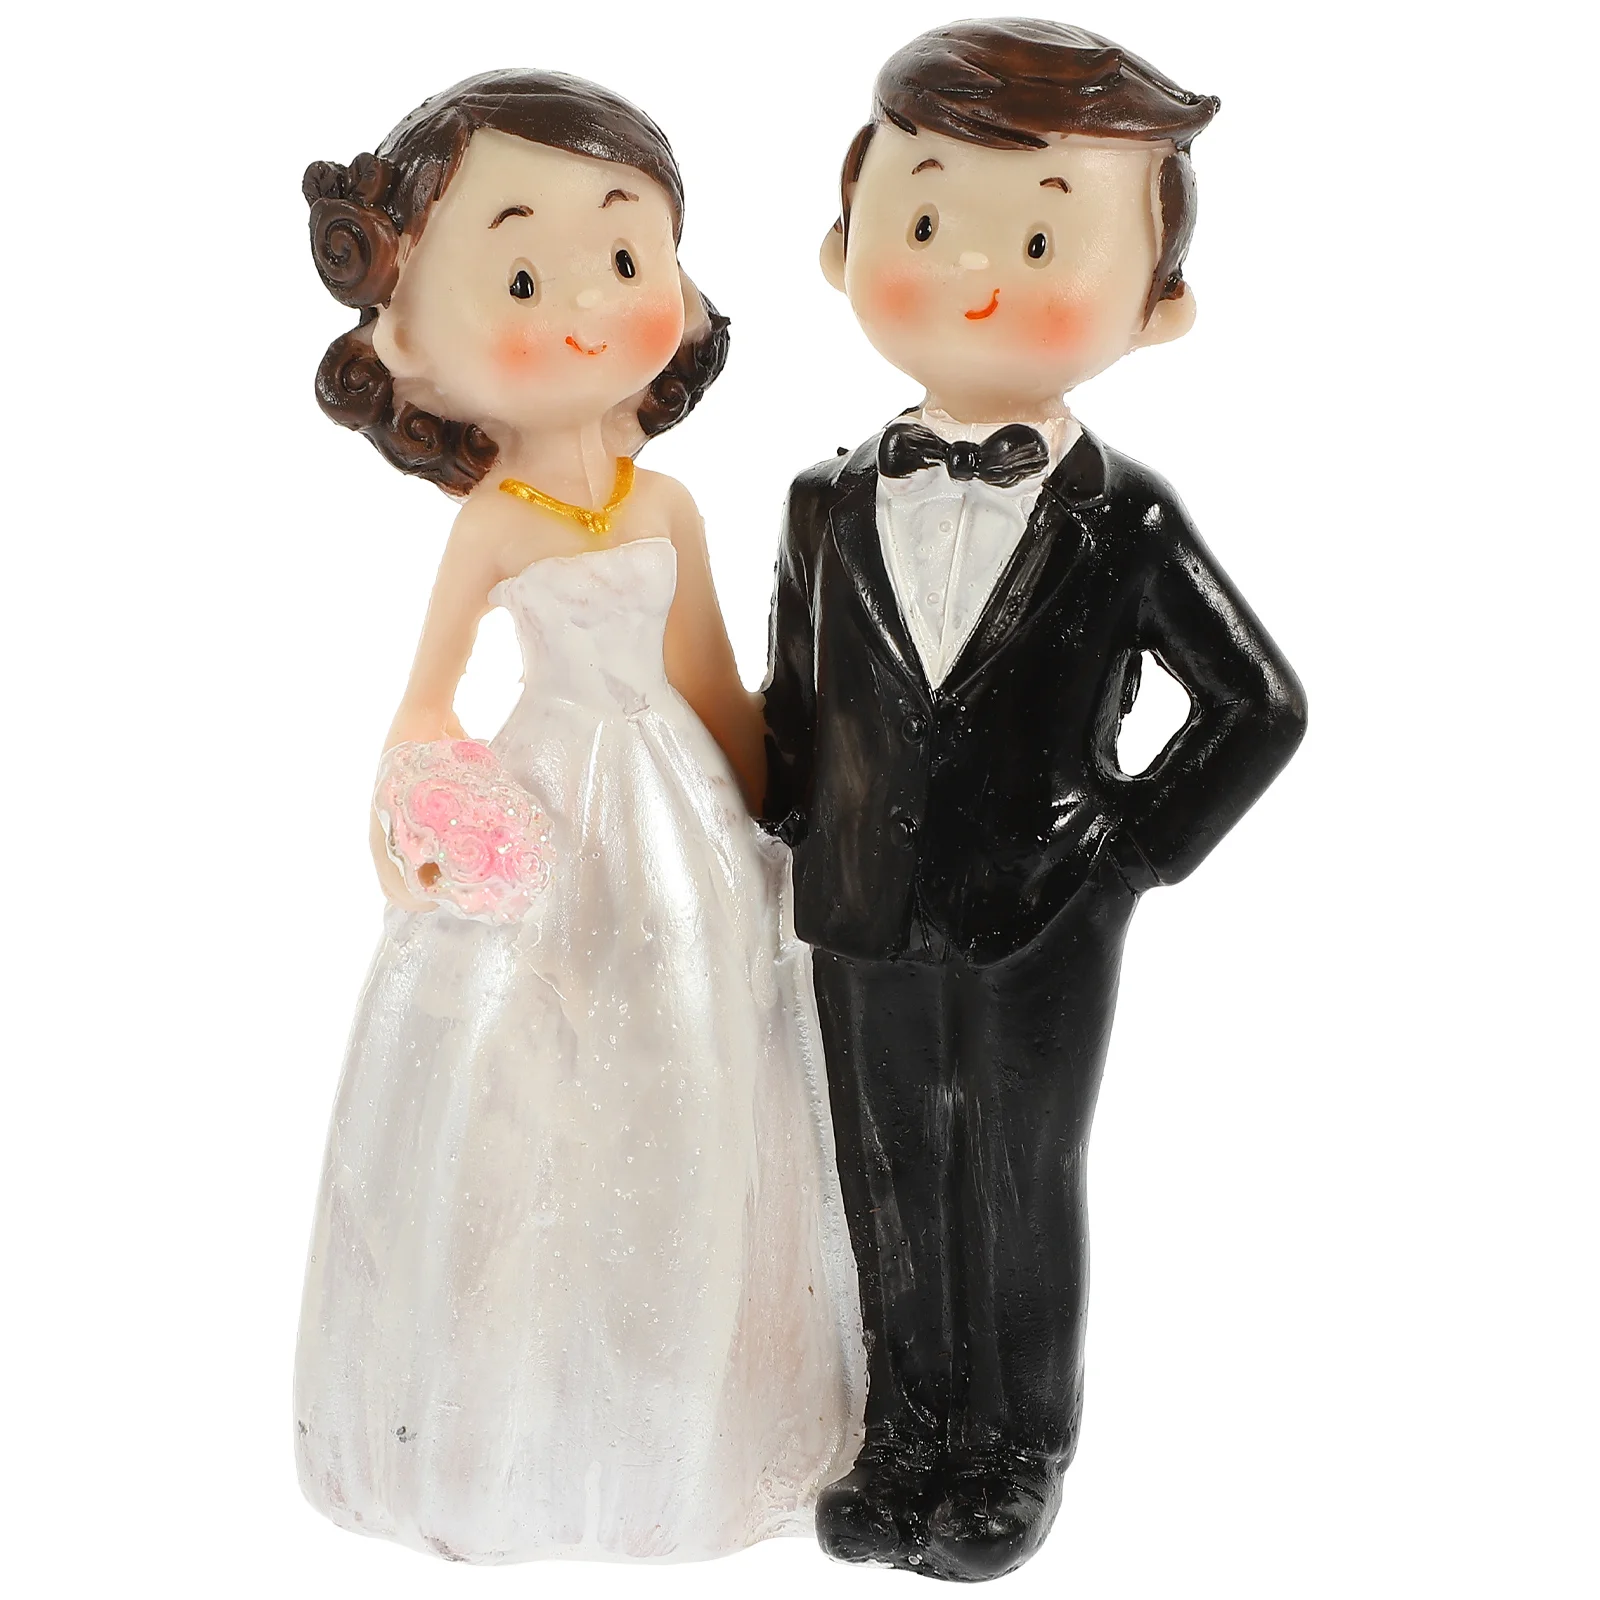 

Stobok Cupcakes Wedding Cupcake Topper Bride Groom Figurines Small Resin Couple Doll Wedding Cake Decorations Party